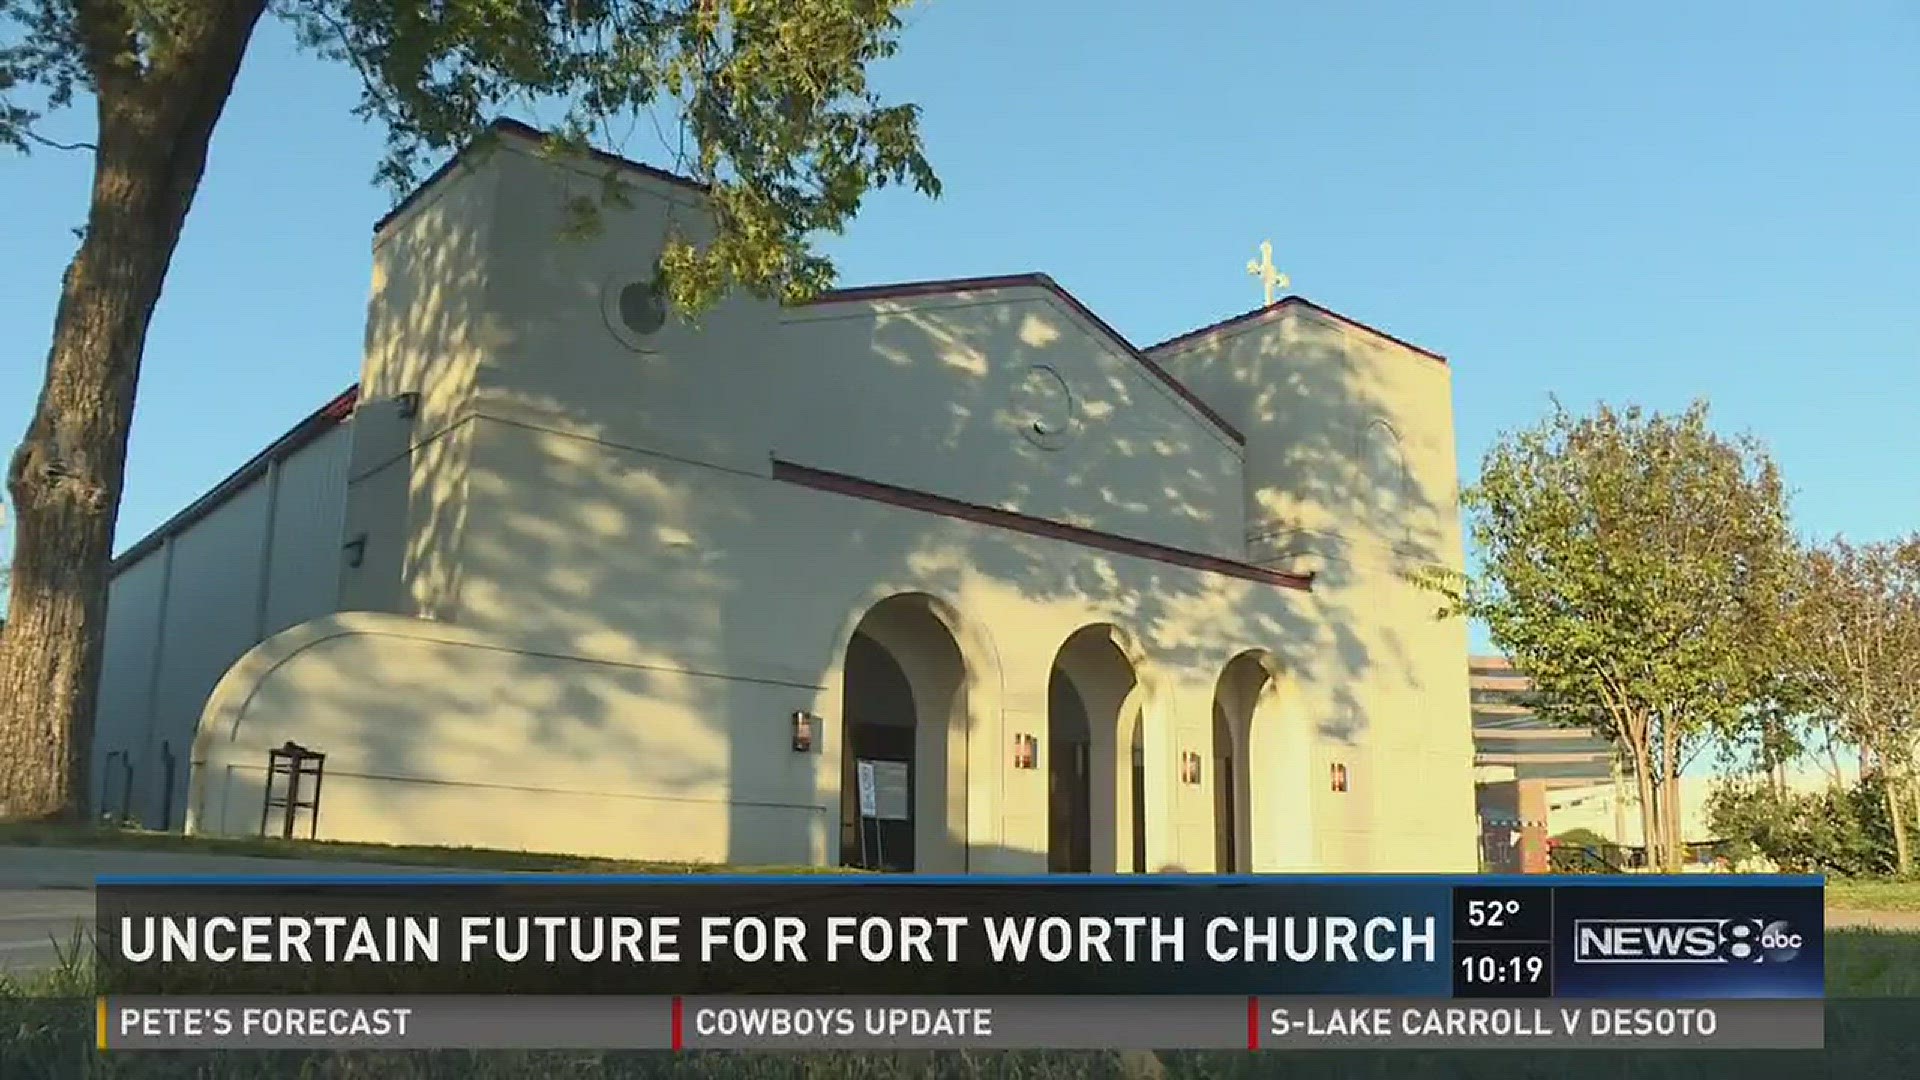 Uncertain future for Fort Worth church